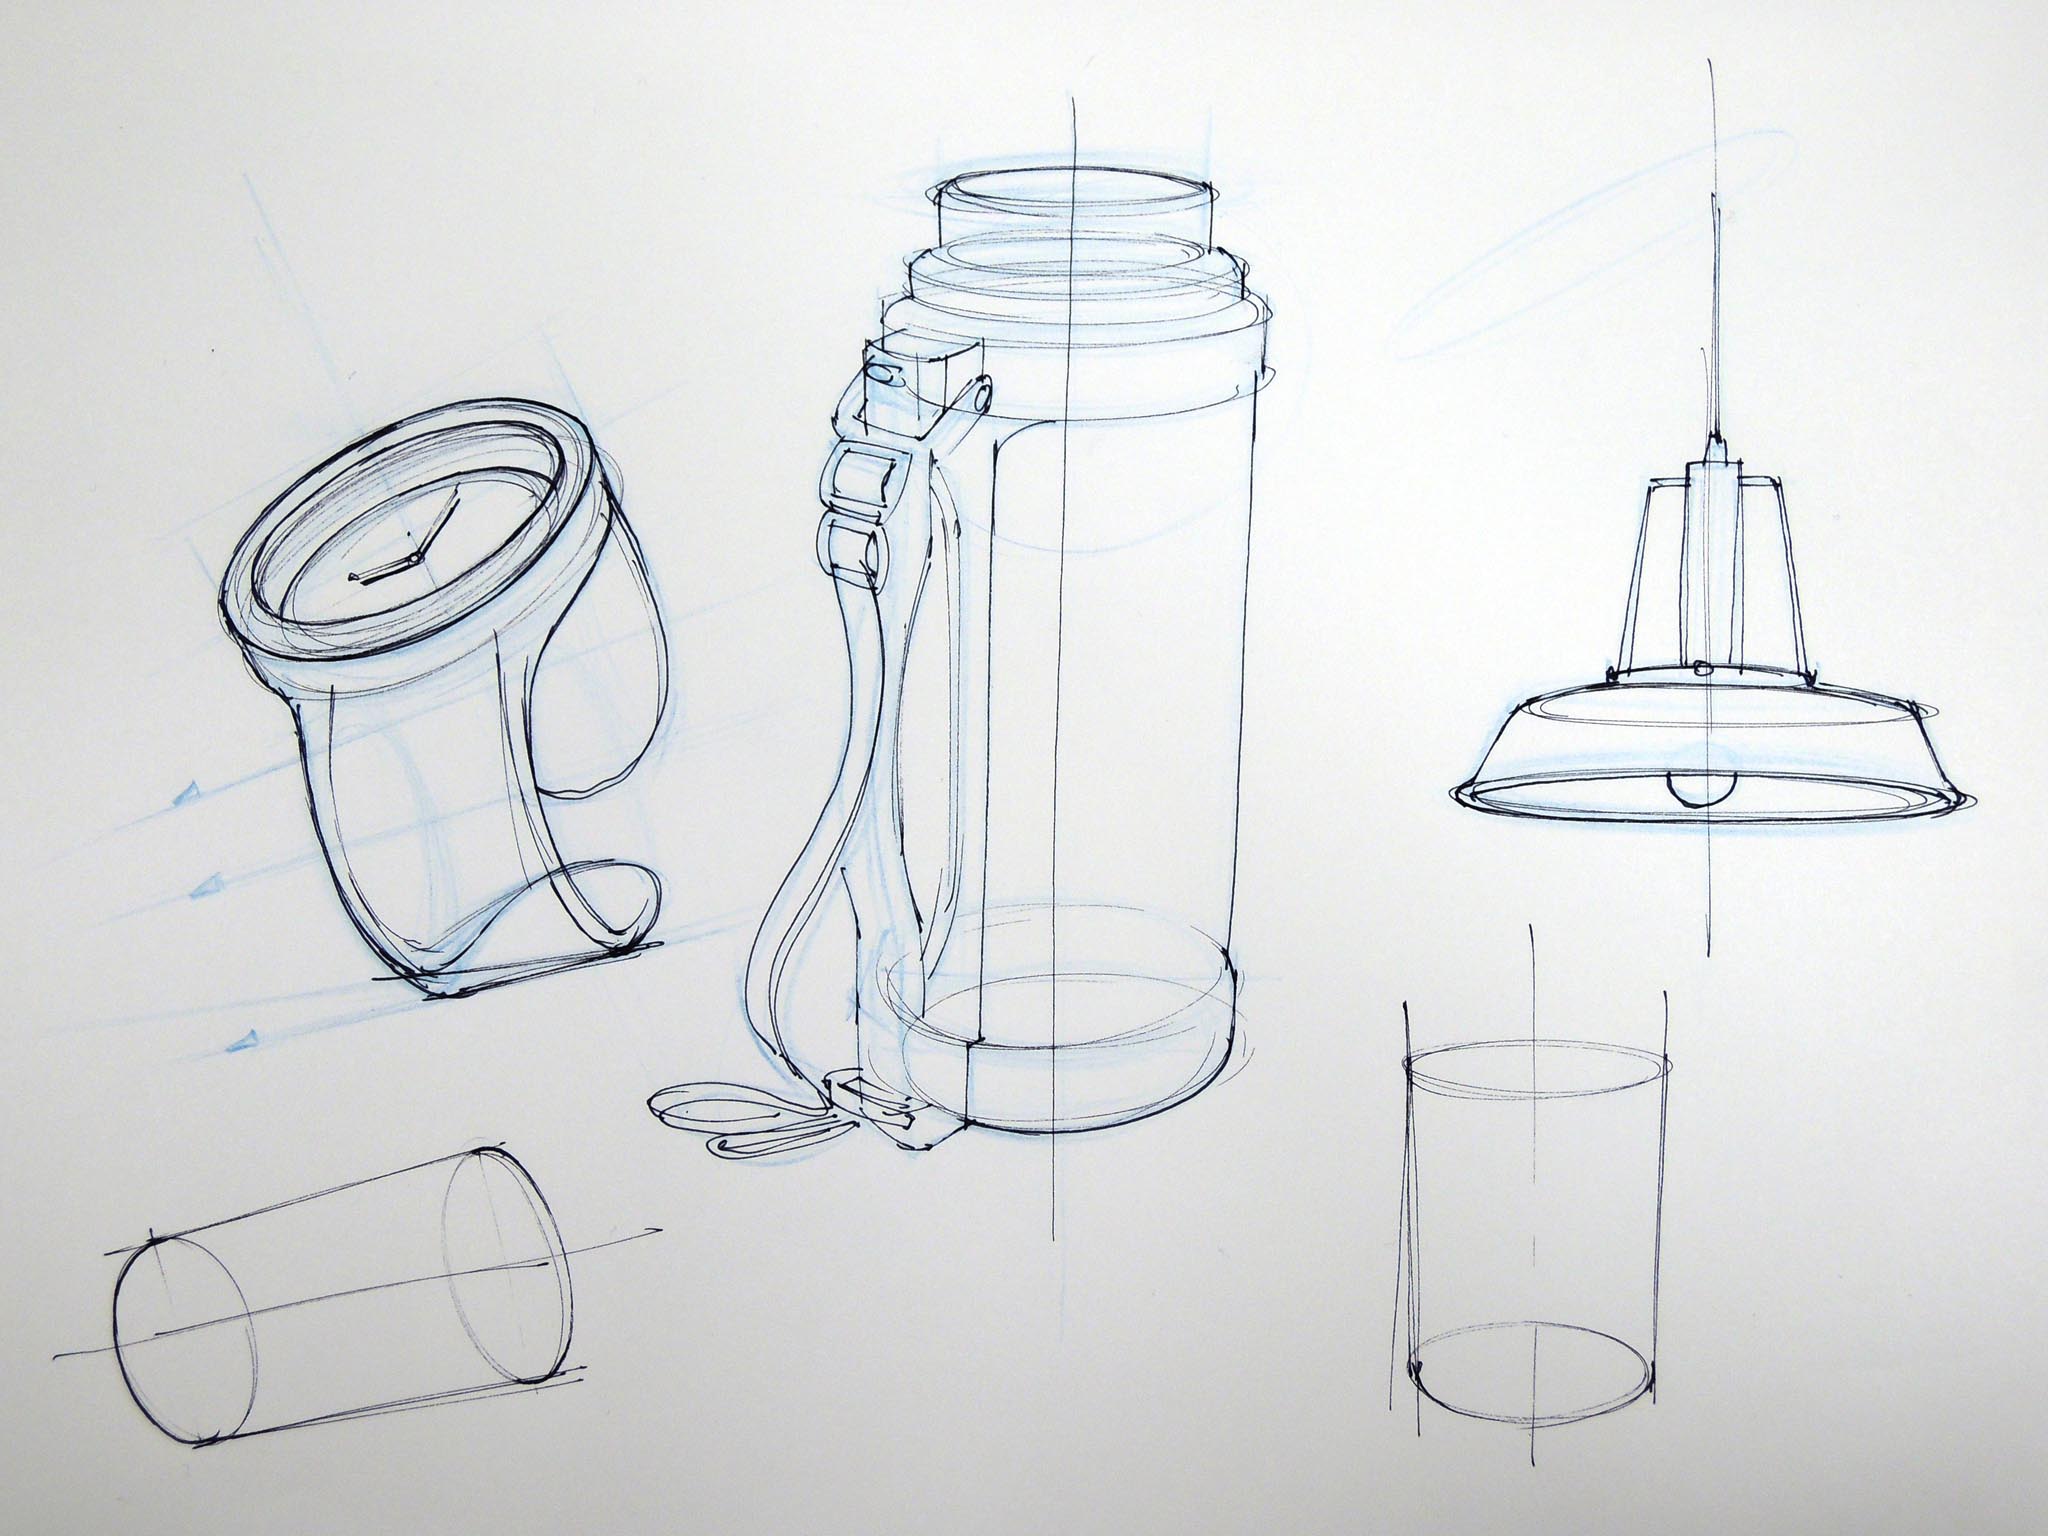 Products and perspective (2) | Exploratory Sketching
